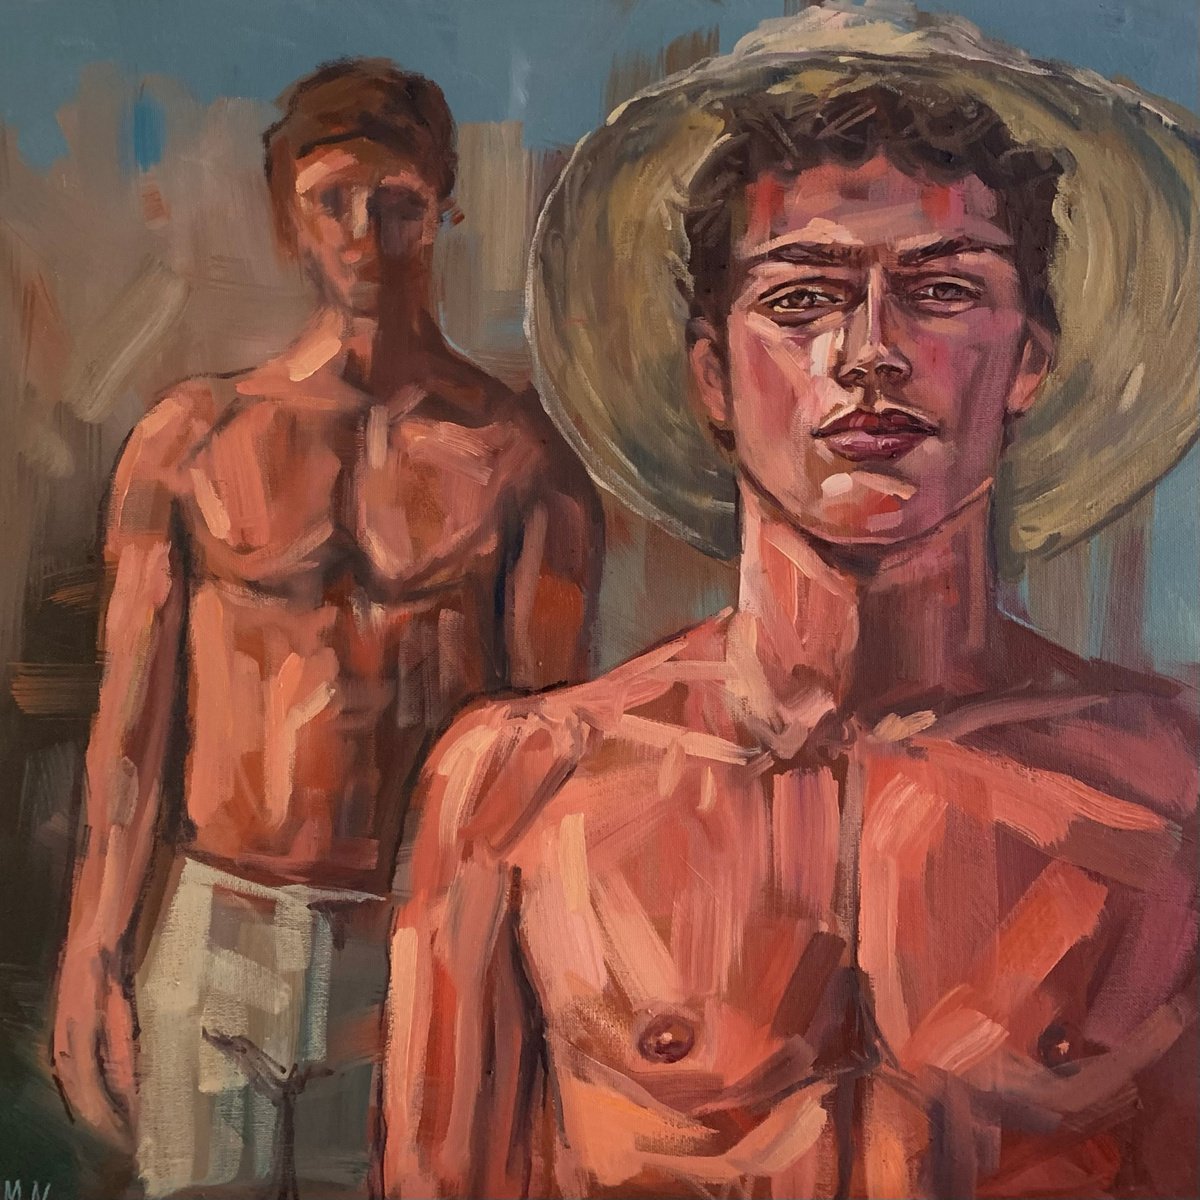 Male nude figures naked men gay oil painting by Emmanouil Nanouris